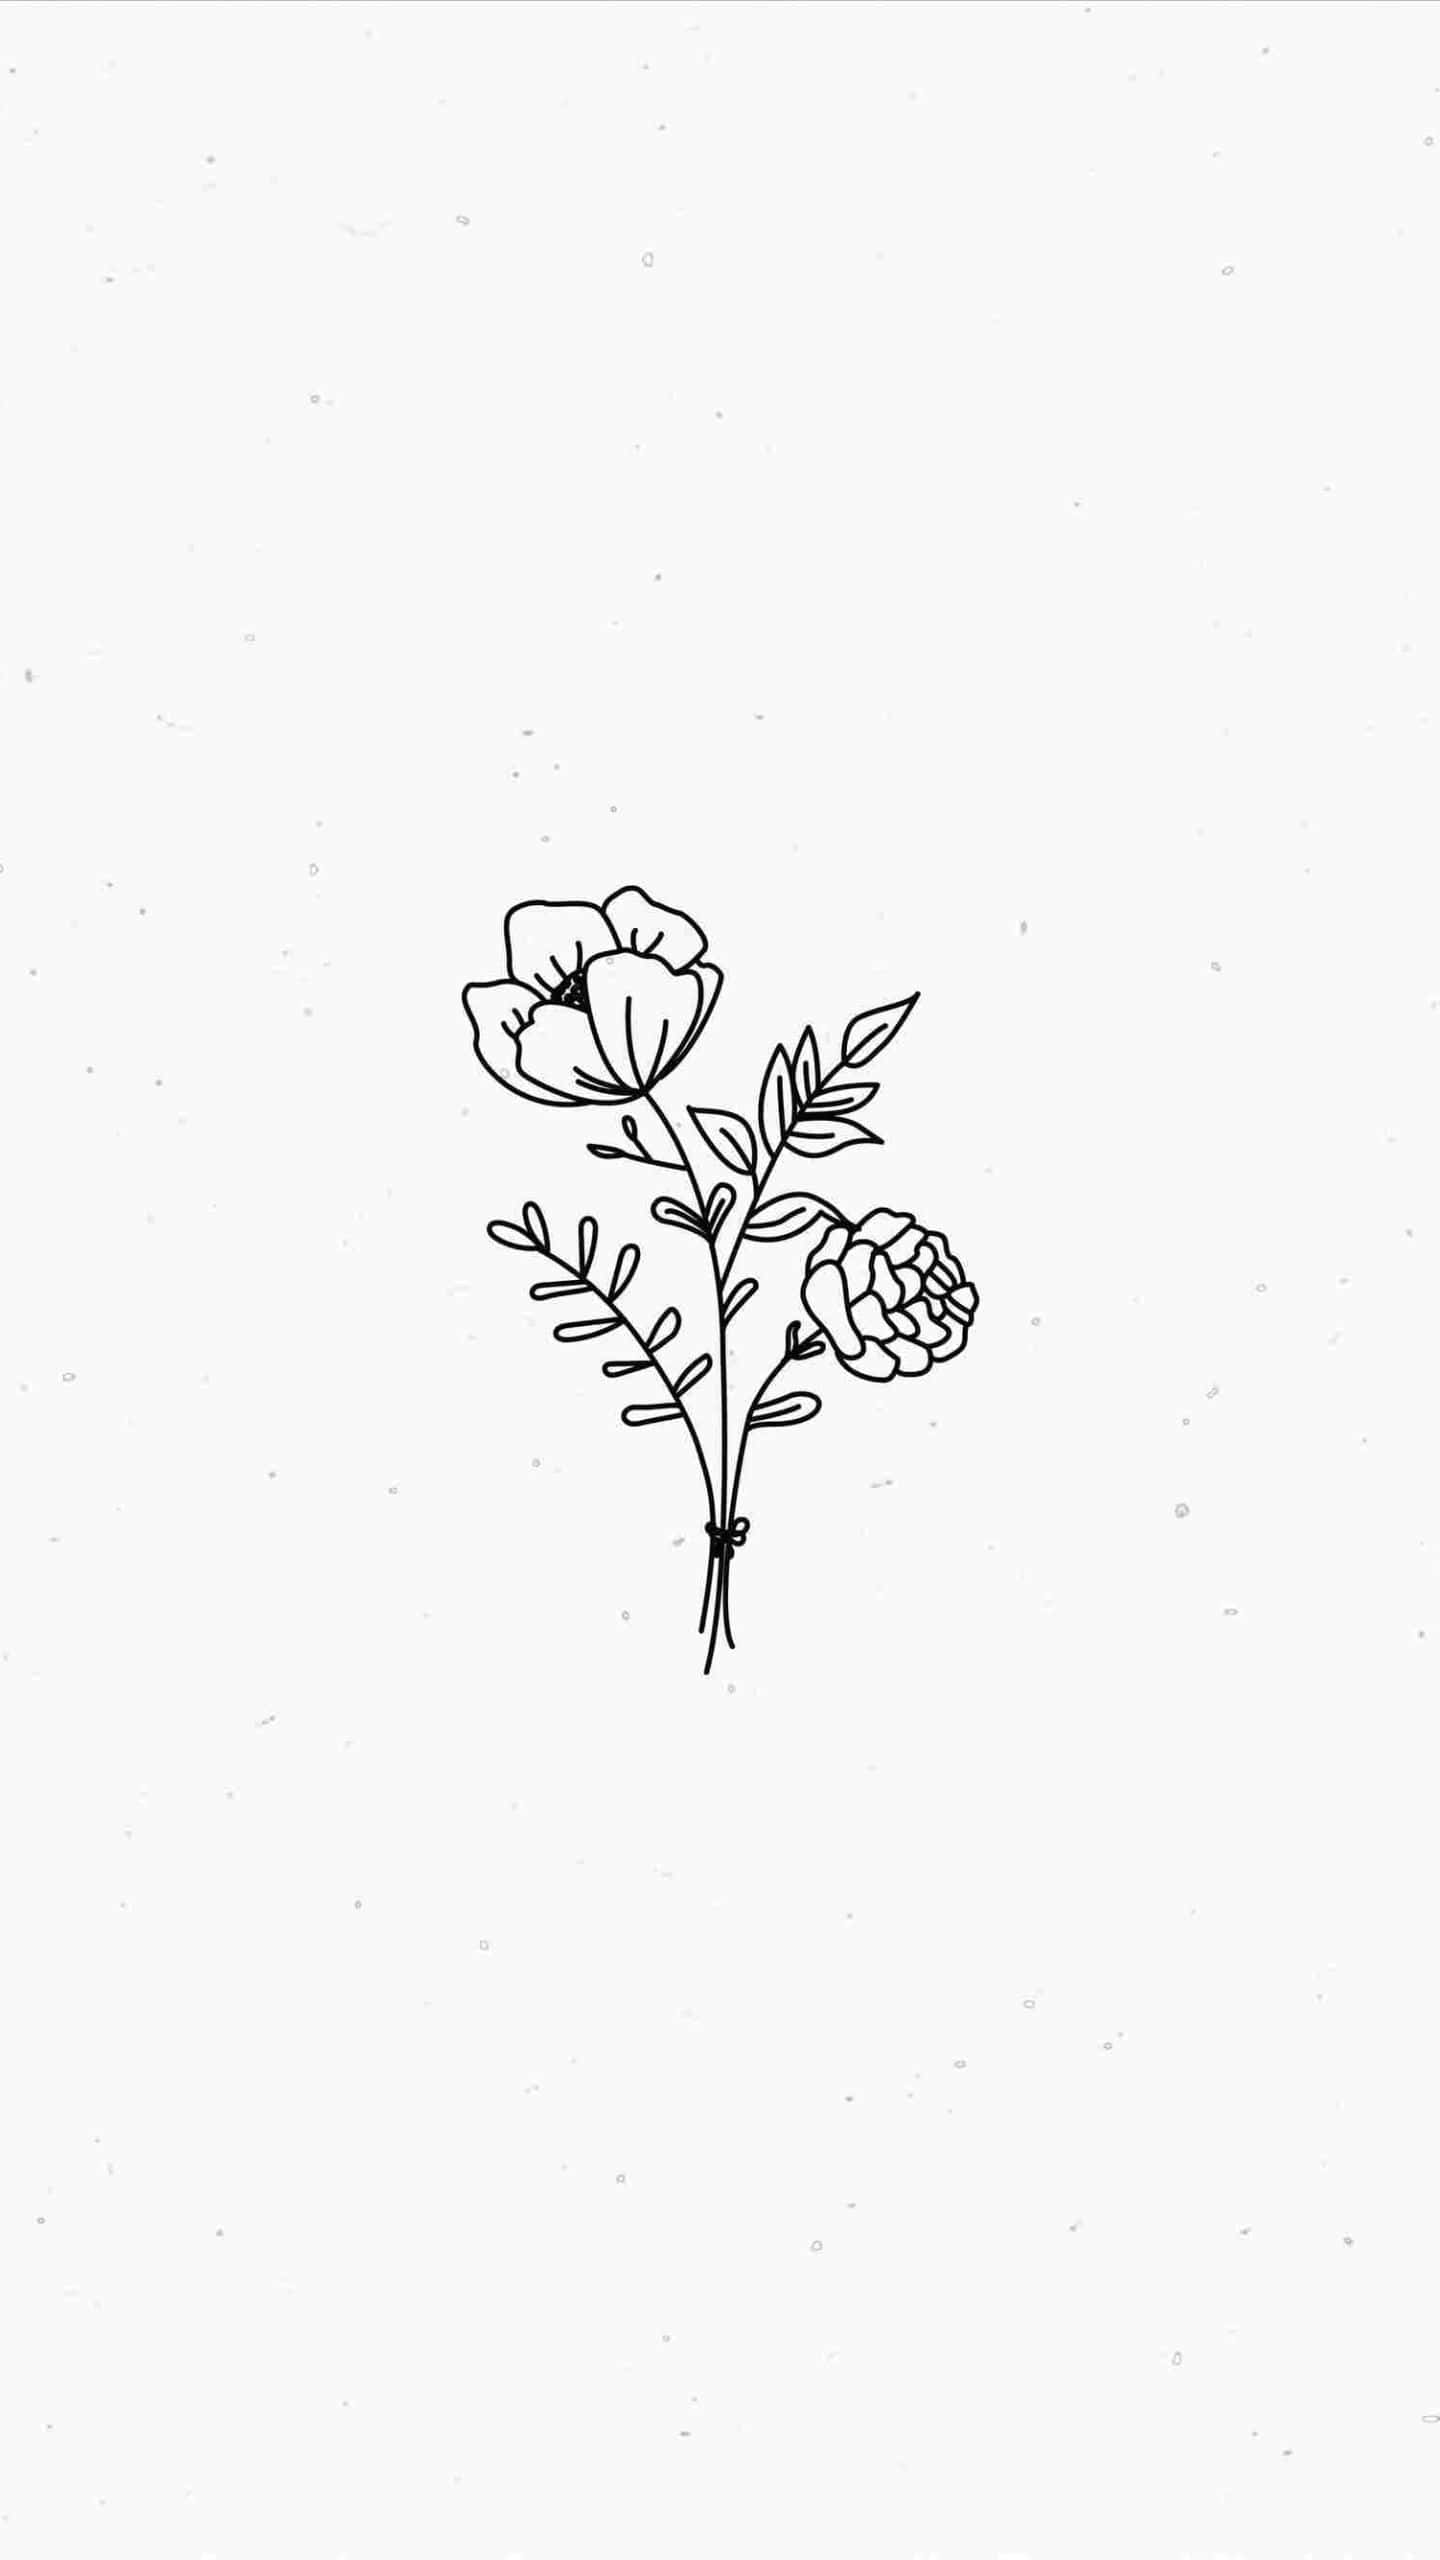 Aesthetic phone wallpaper with a minimalist floral design - Clean